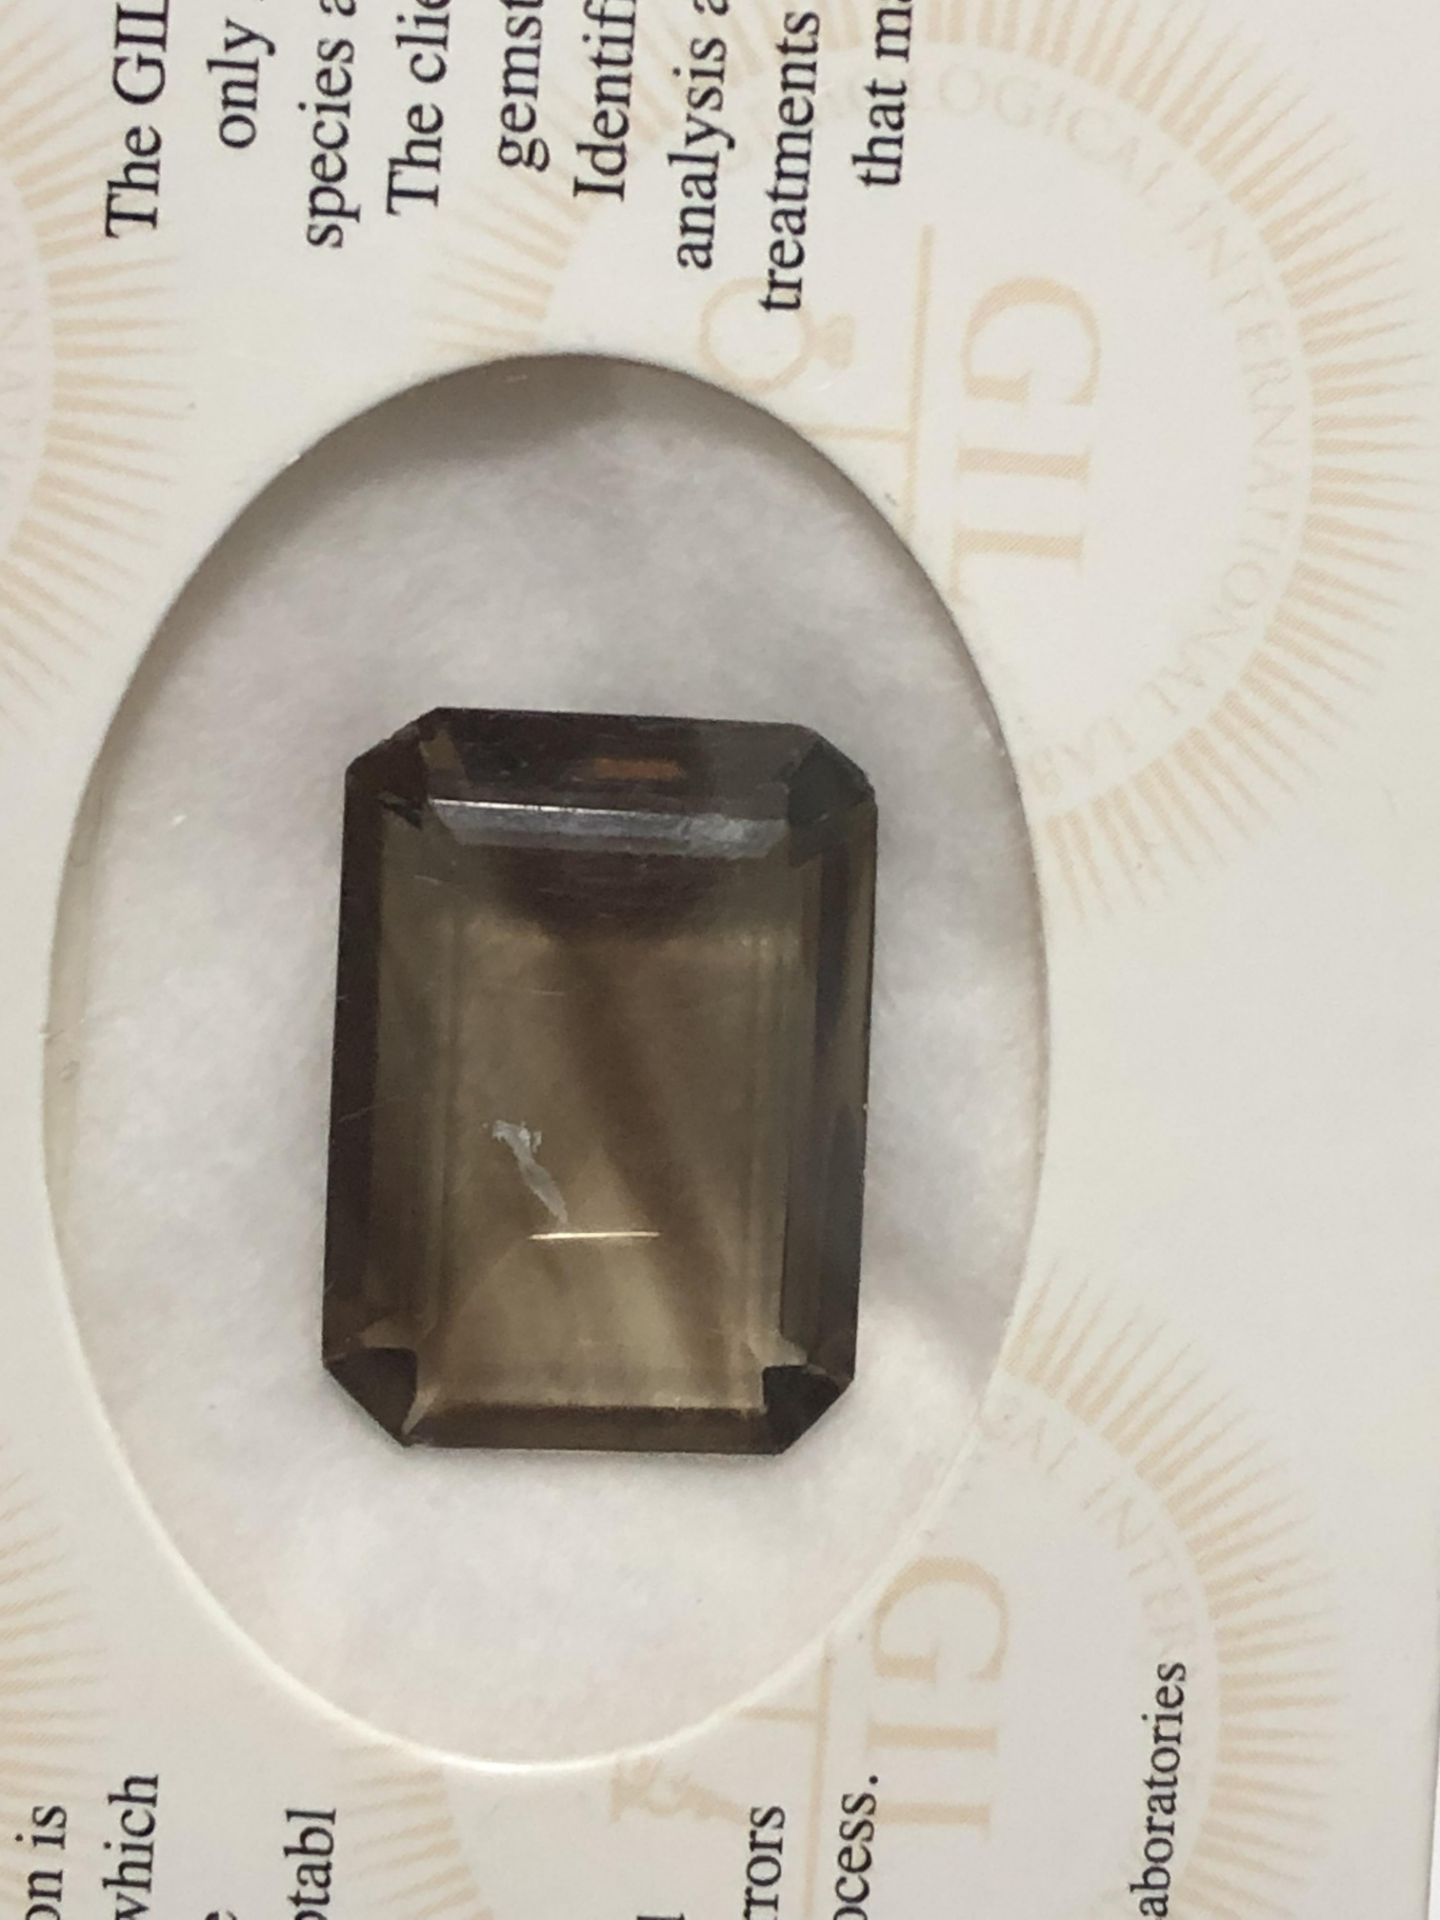 17.52ct Natural Quartz with GIL Certificate - Image 3 of 6